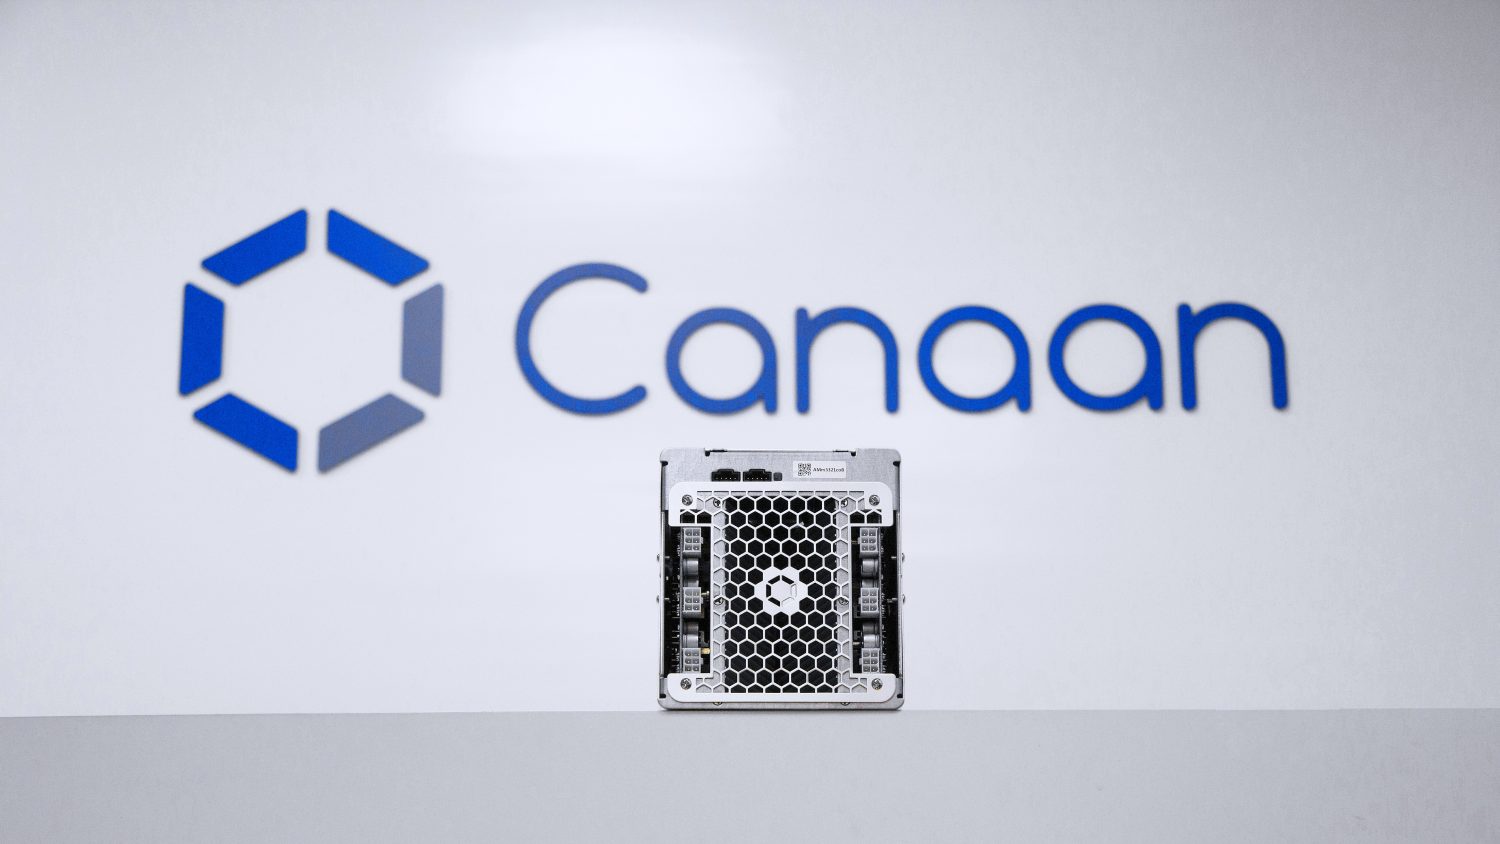 Canaan’s-q2-loss-narrows-to-$2.4m-from-q1-on-160%-revenue-increase